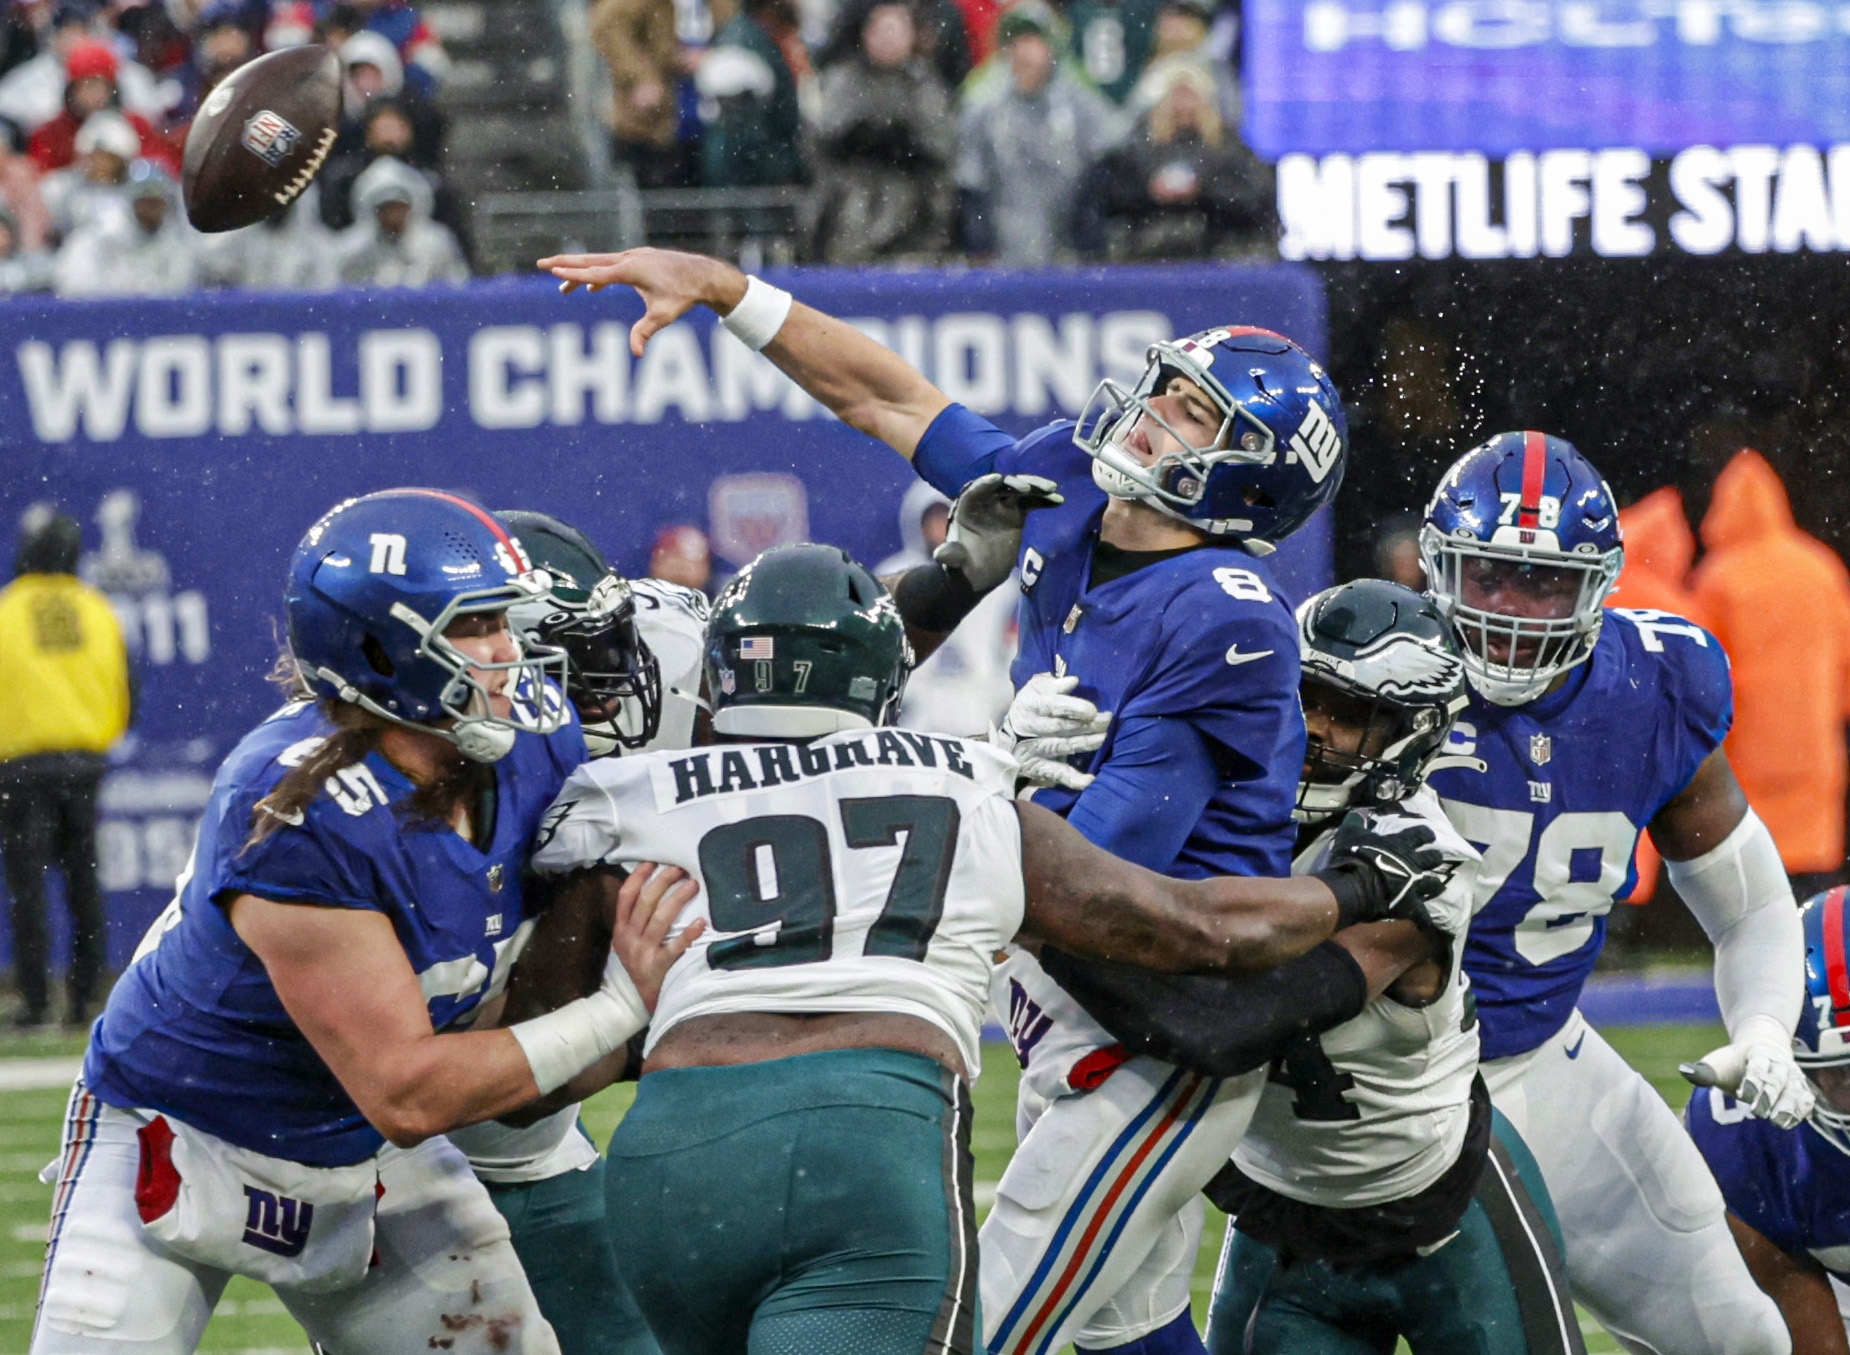 NFL playoffs: No. 1 seed Eagles cruise by Giants to reach NFC title game  with ease